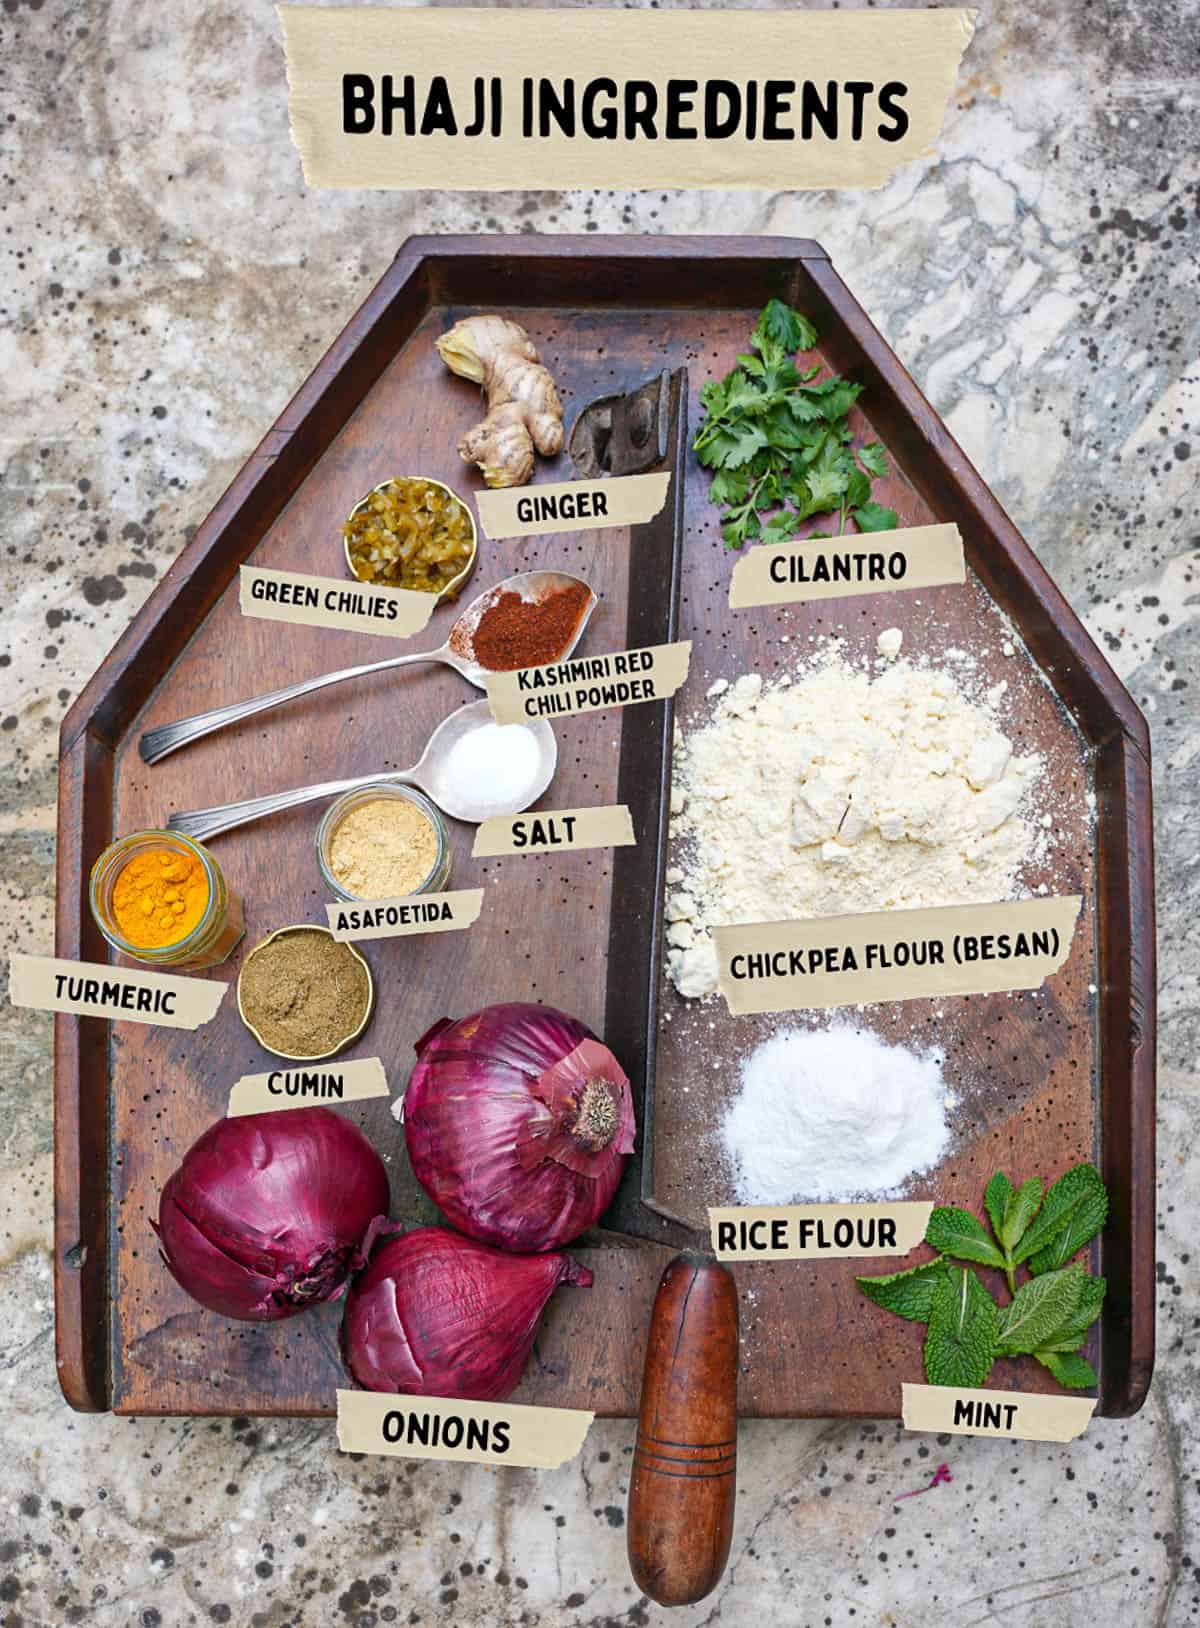 Bhaji ingredients are measured out and labeled on a wooden cutting board on top of a stone counter top.